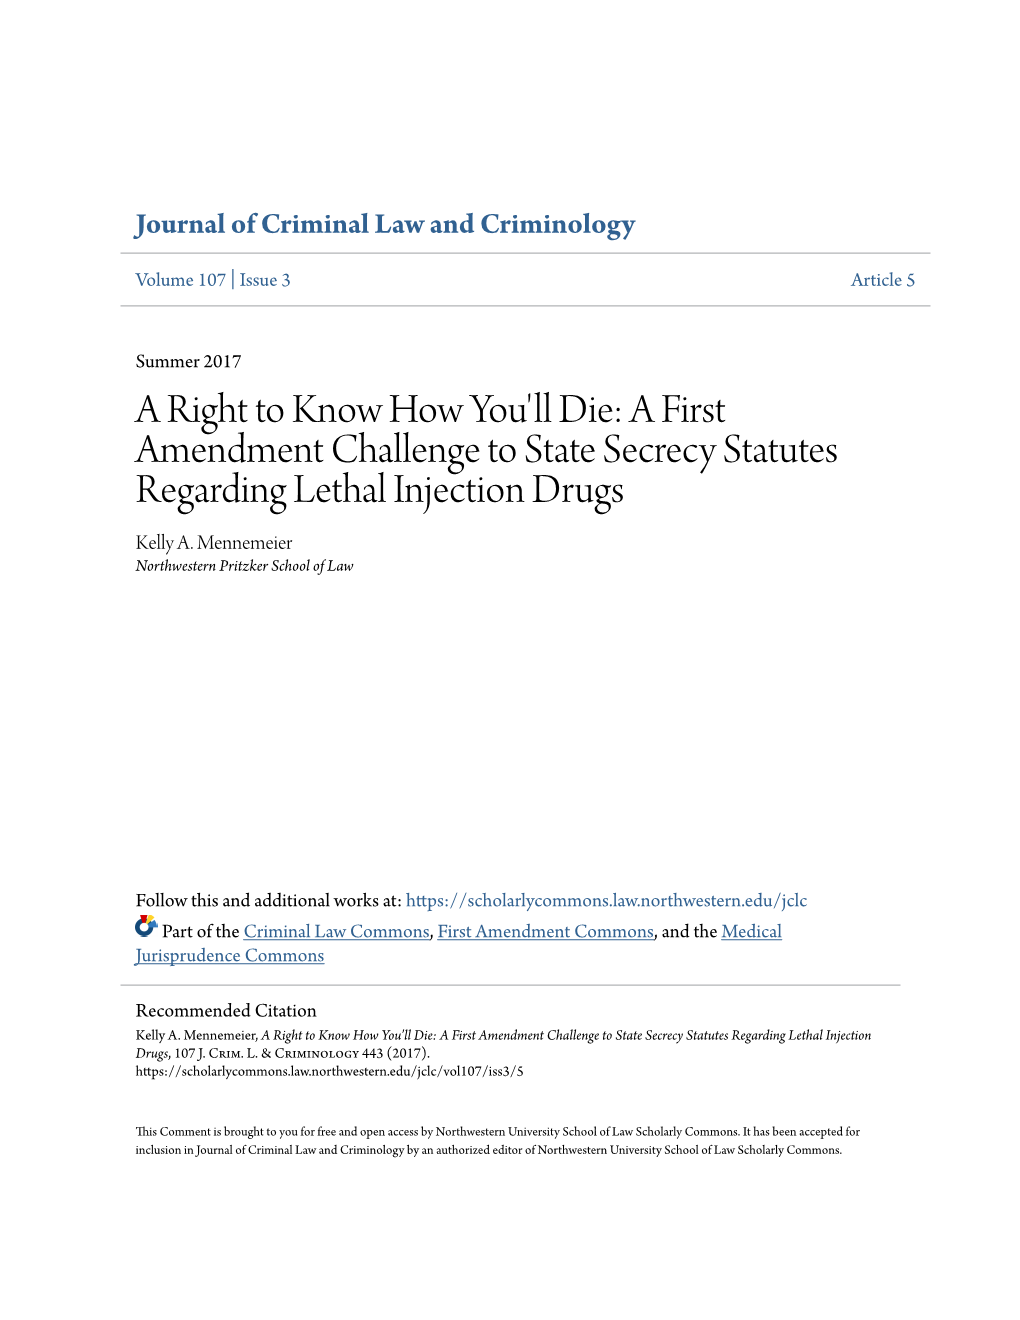 A First Amendment Challenge to State Secrecy Statutes Regarding Lethal Injection Drugs Kelly A